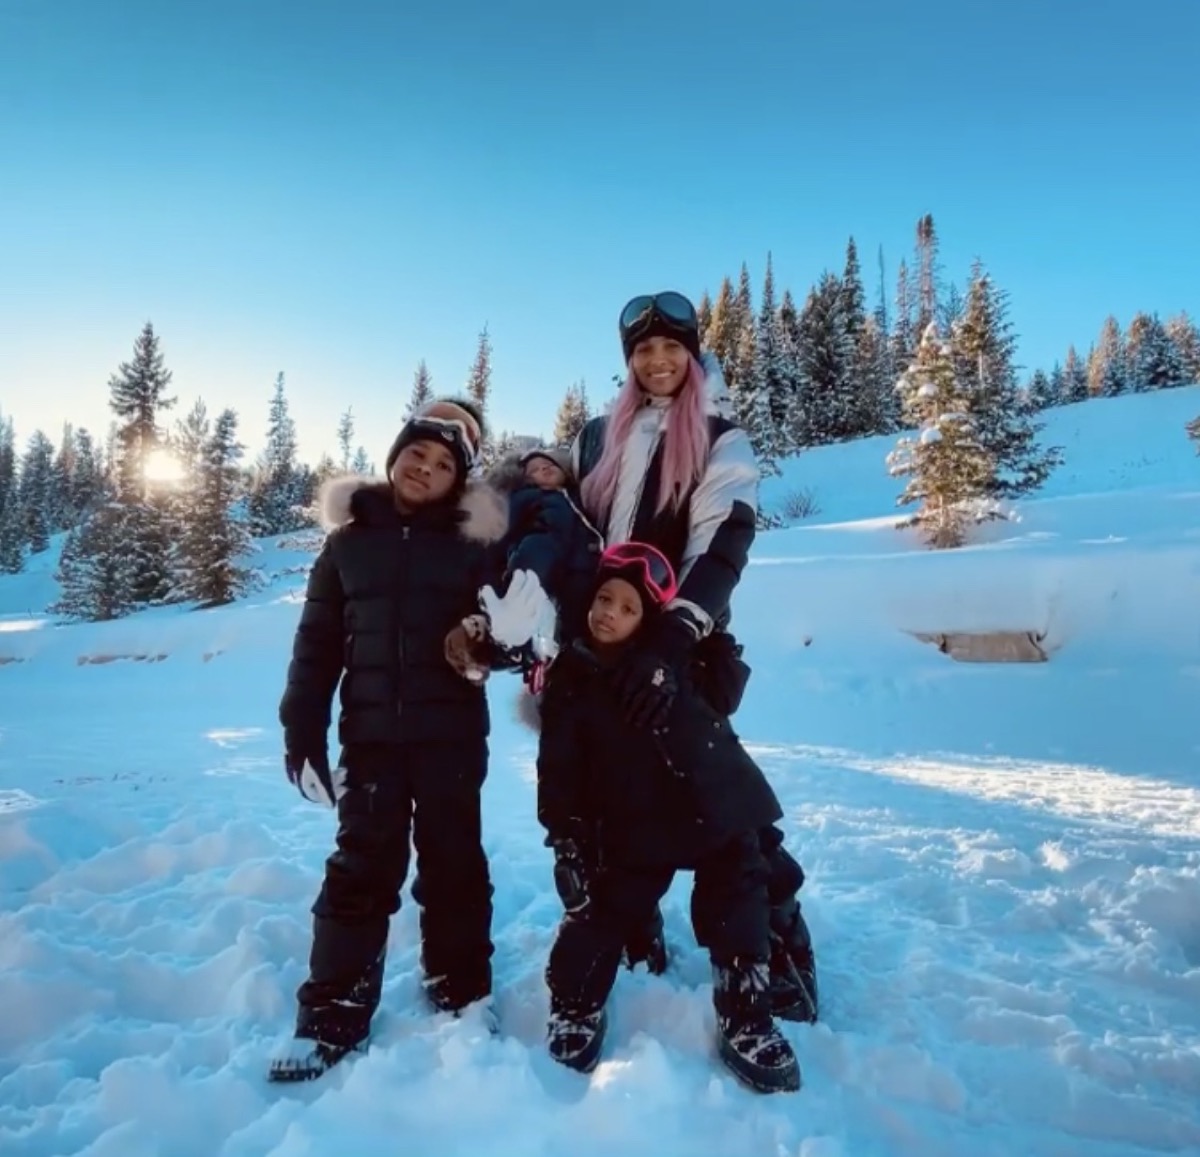 ciara and her three children skiing in black and white outfits